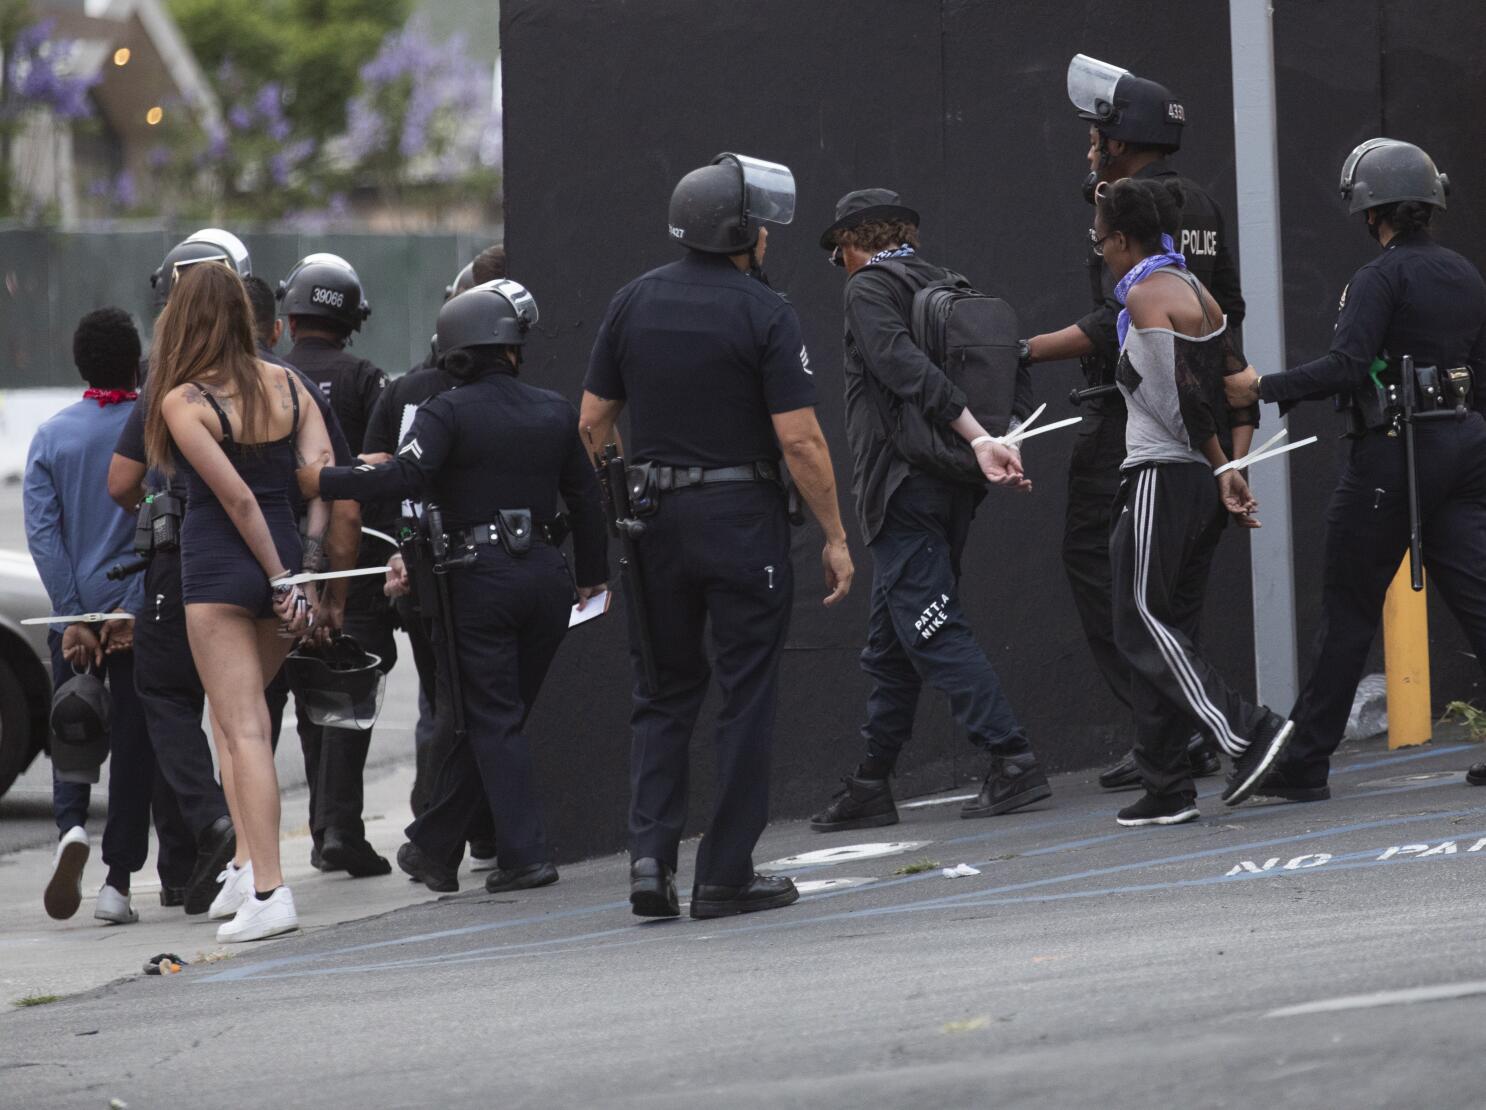 LAPD's use of force significantly injures protesters - Los Angeles